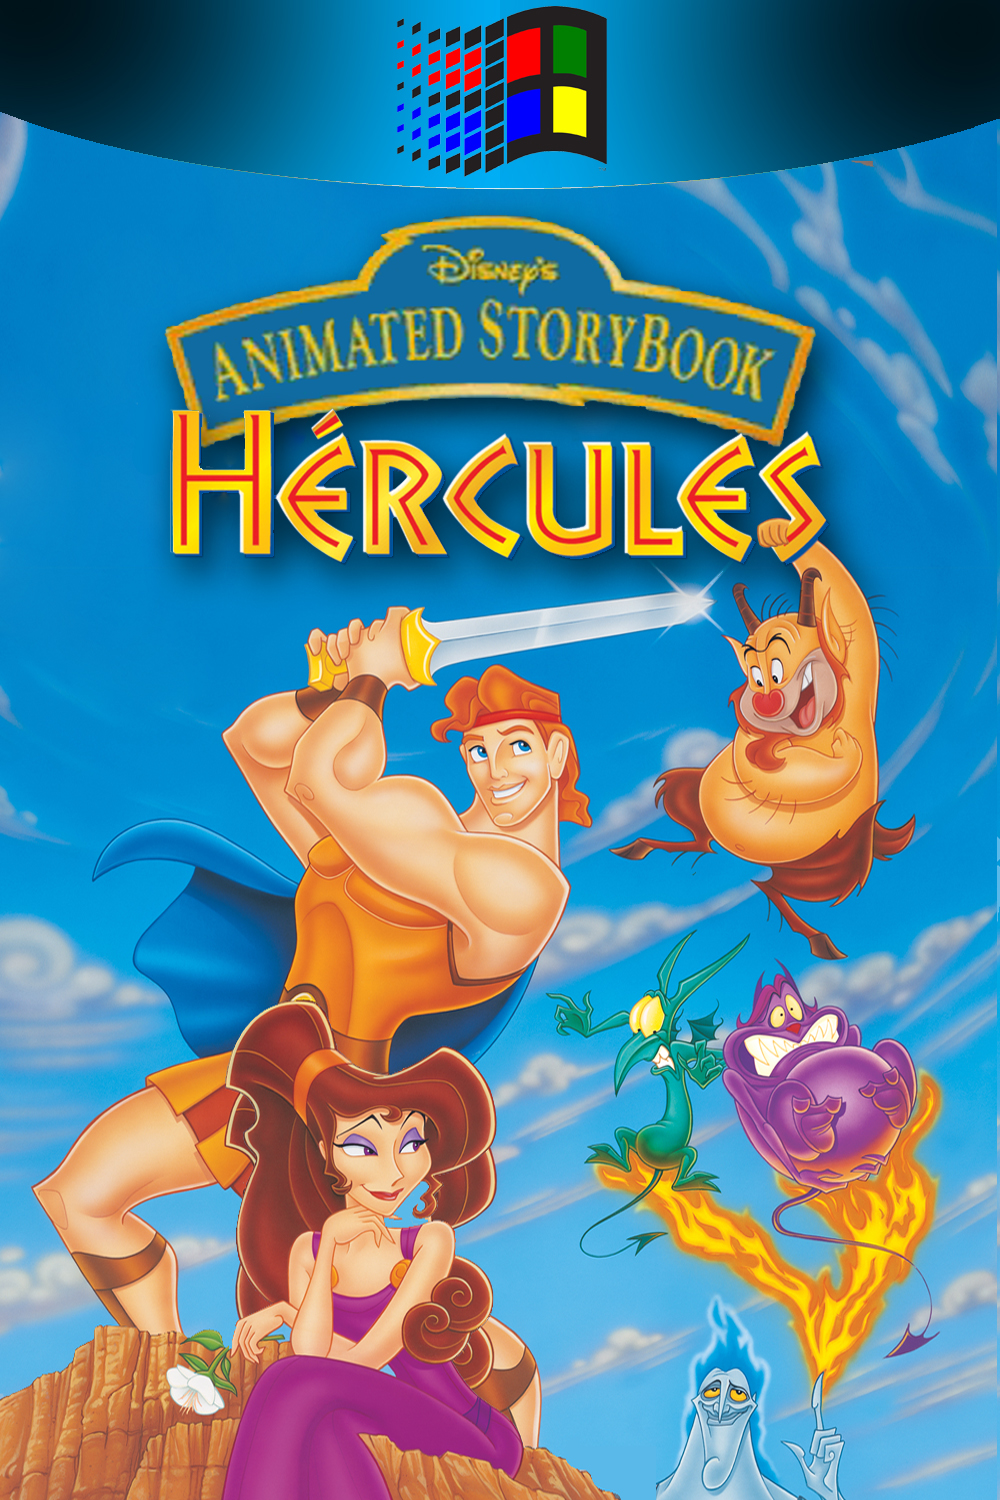 The Collection Chamber: DISNEY'S ANIMATED STORYBOOK: HERCULES